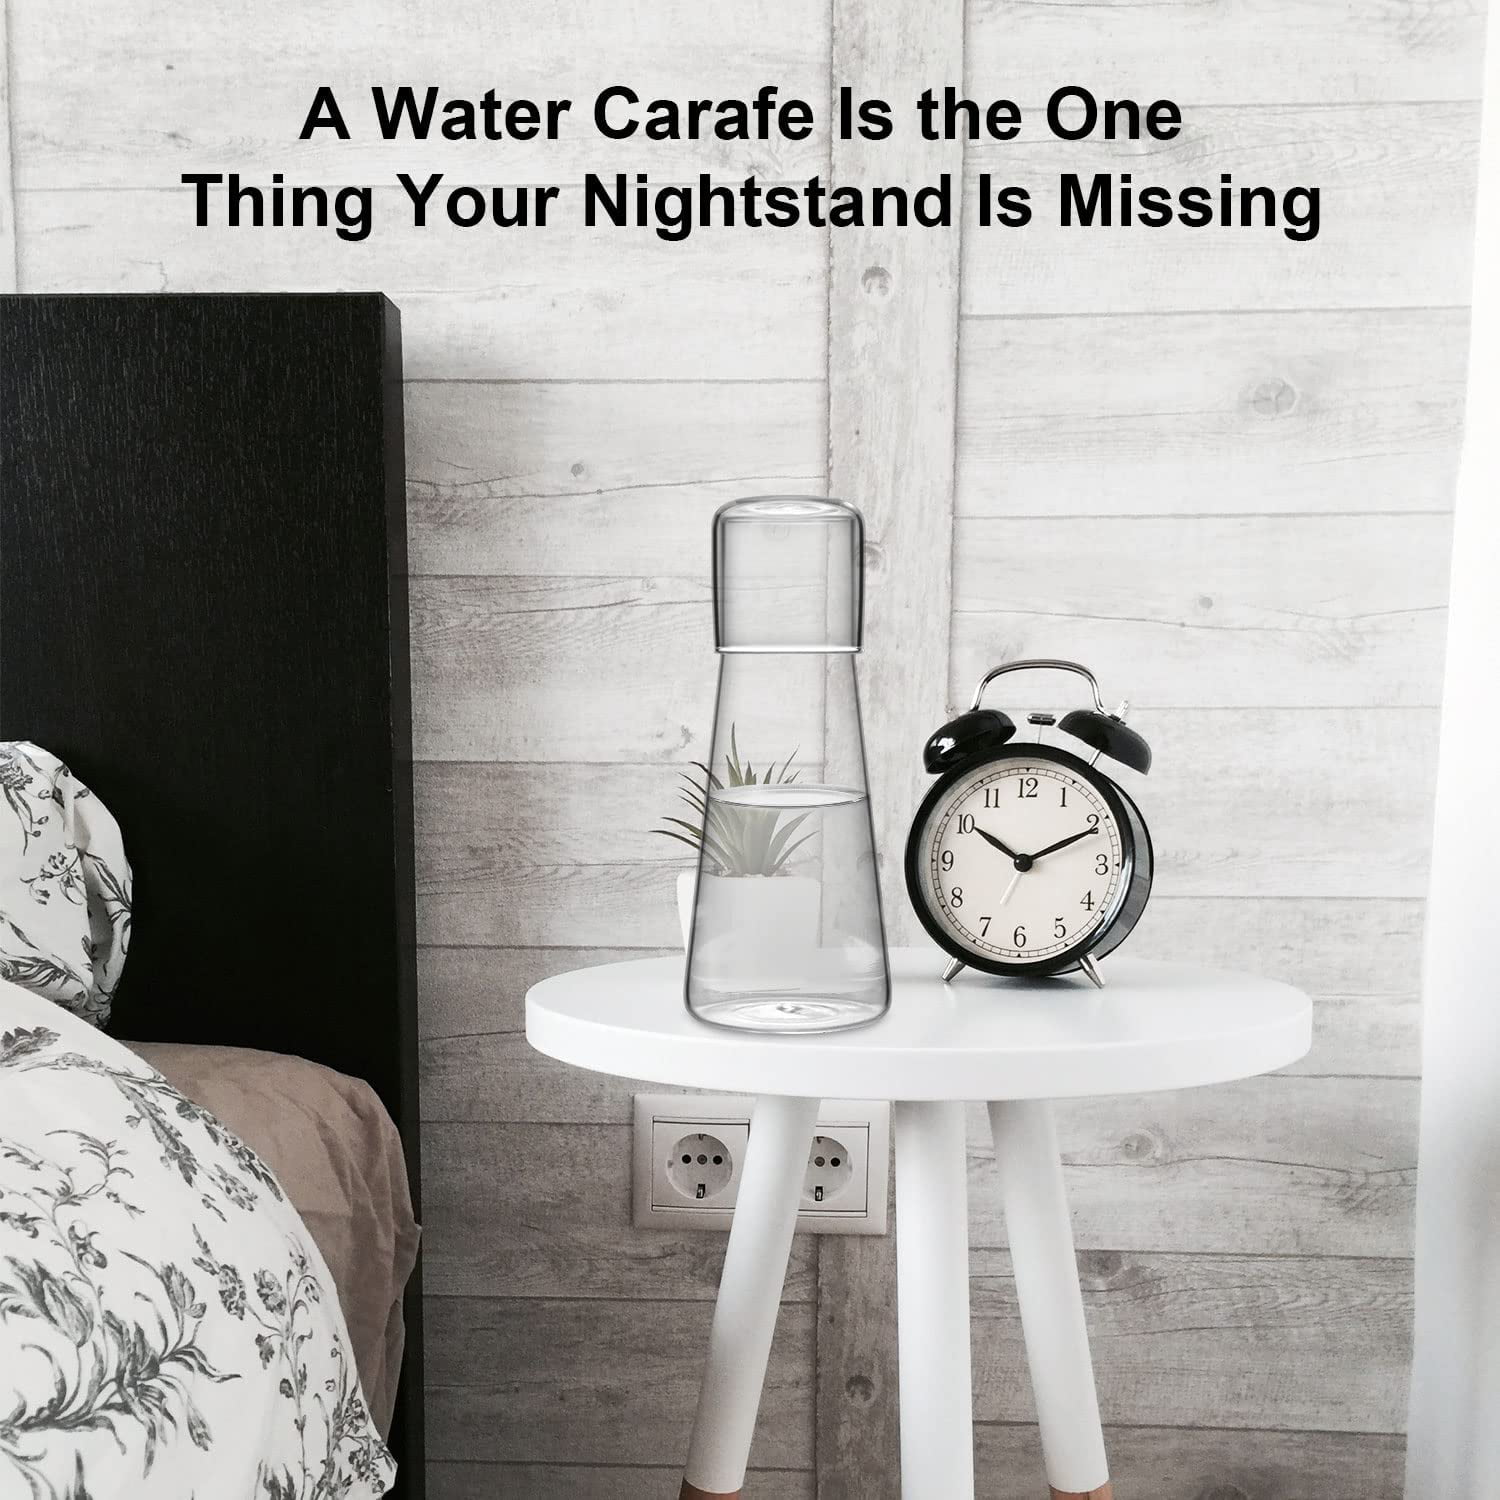 A Water Carafe Is the One Thing Your Nightstand Is Missing